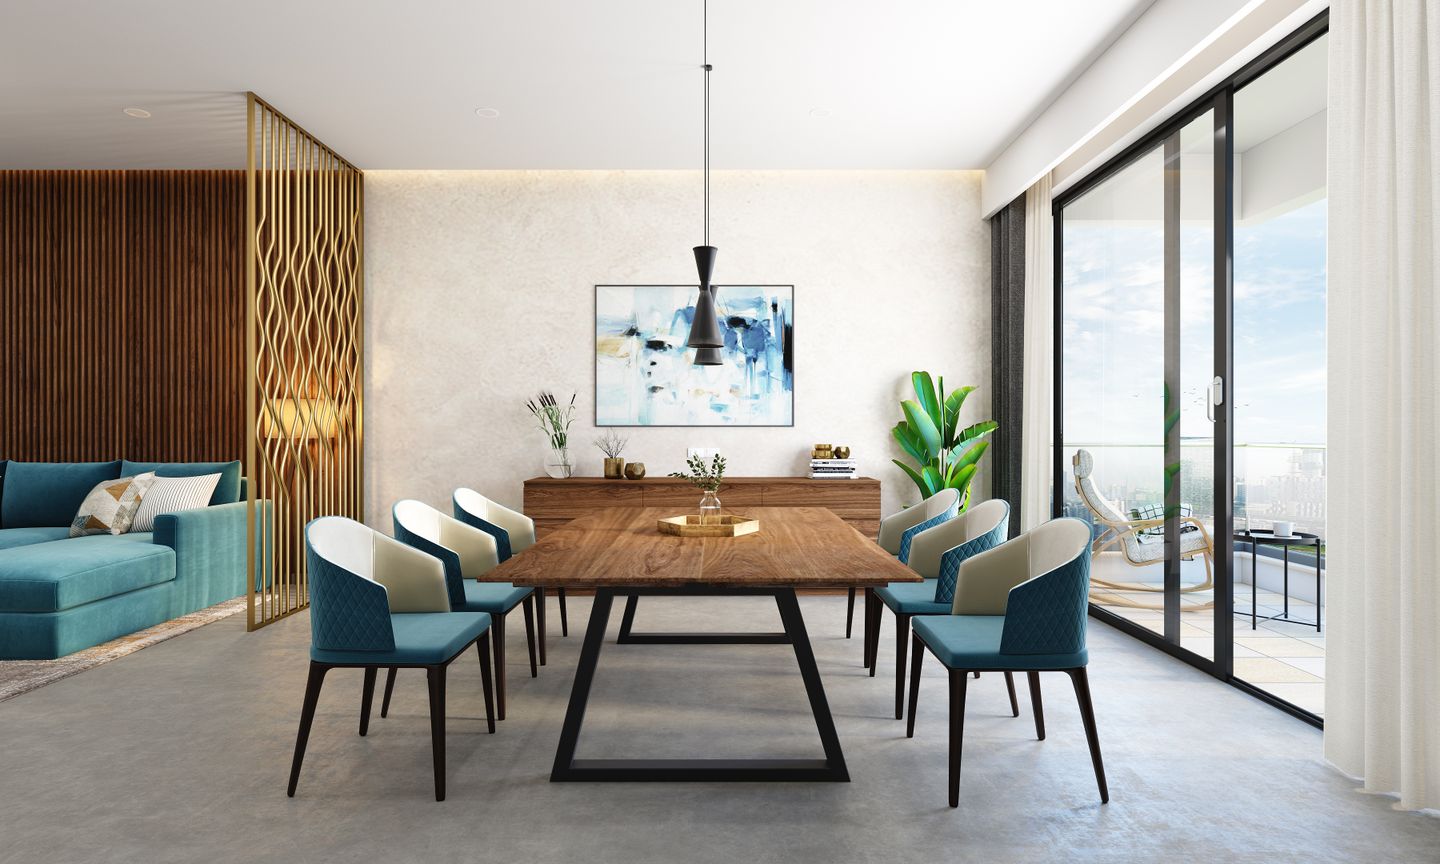 Well-Ventilated Dining Room With Six-Seater Dining Table - Livspace